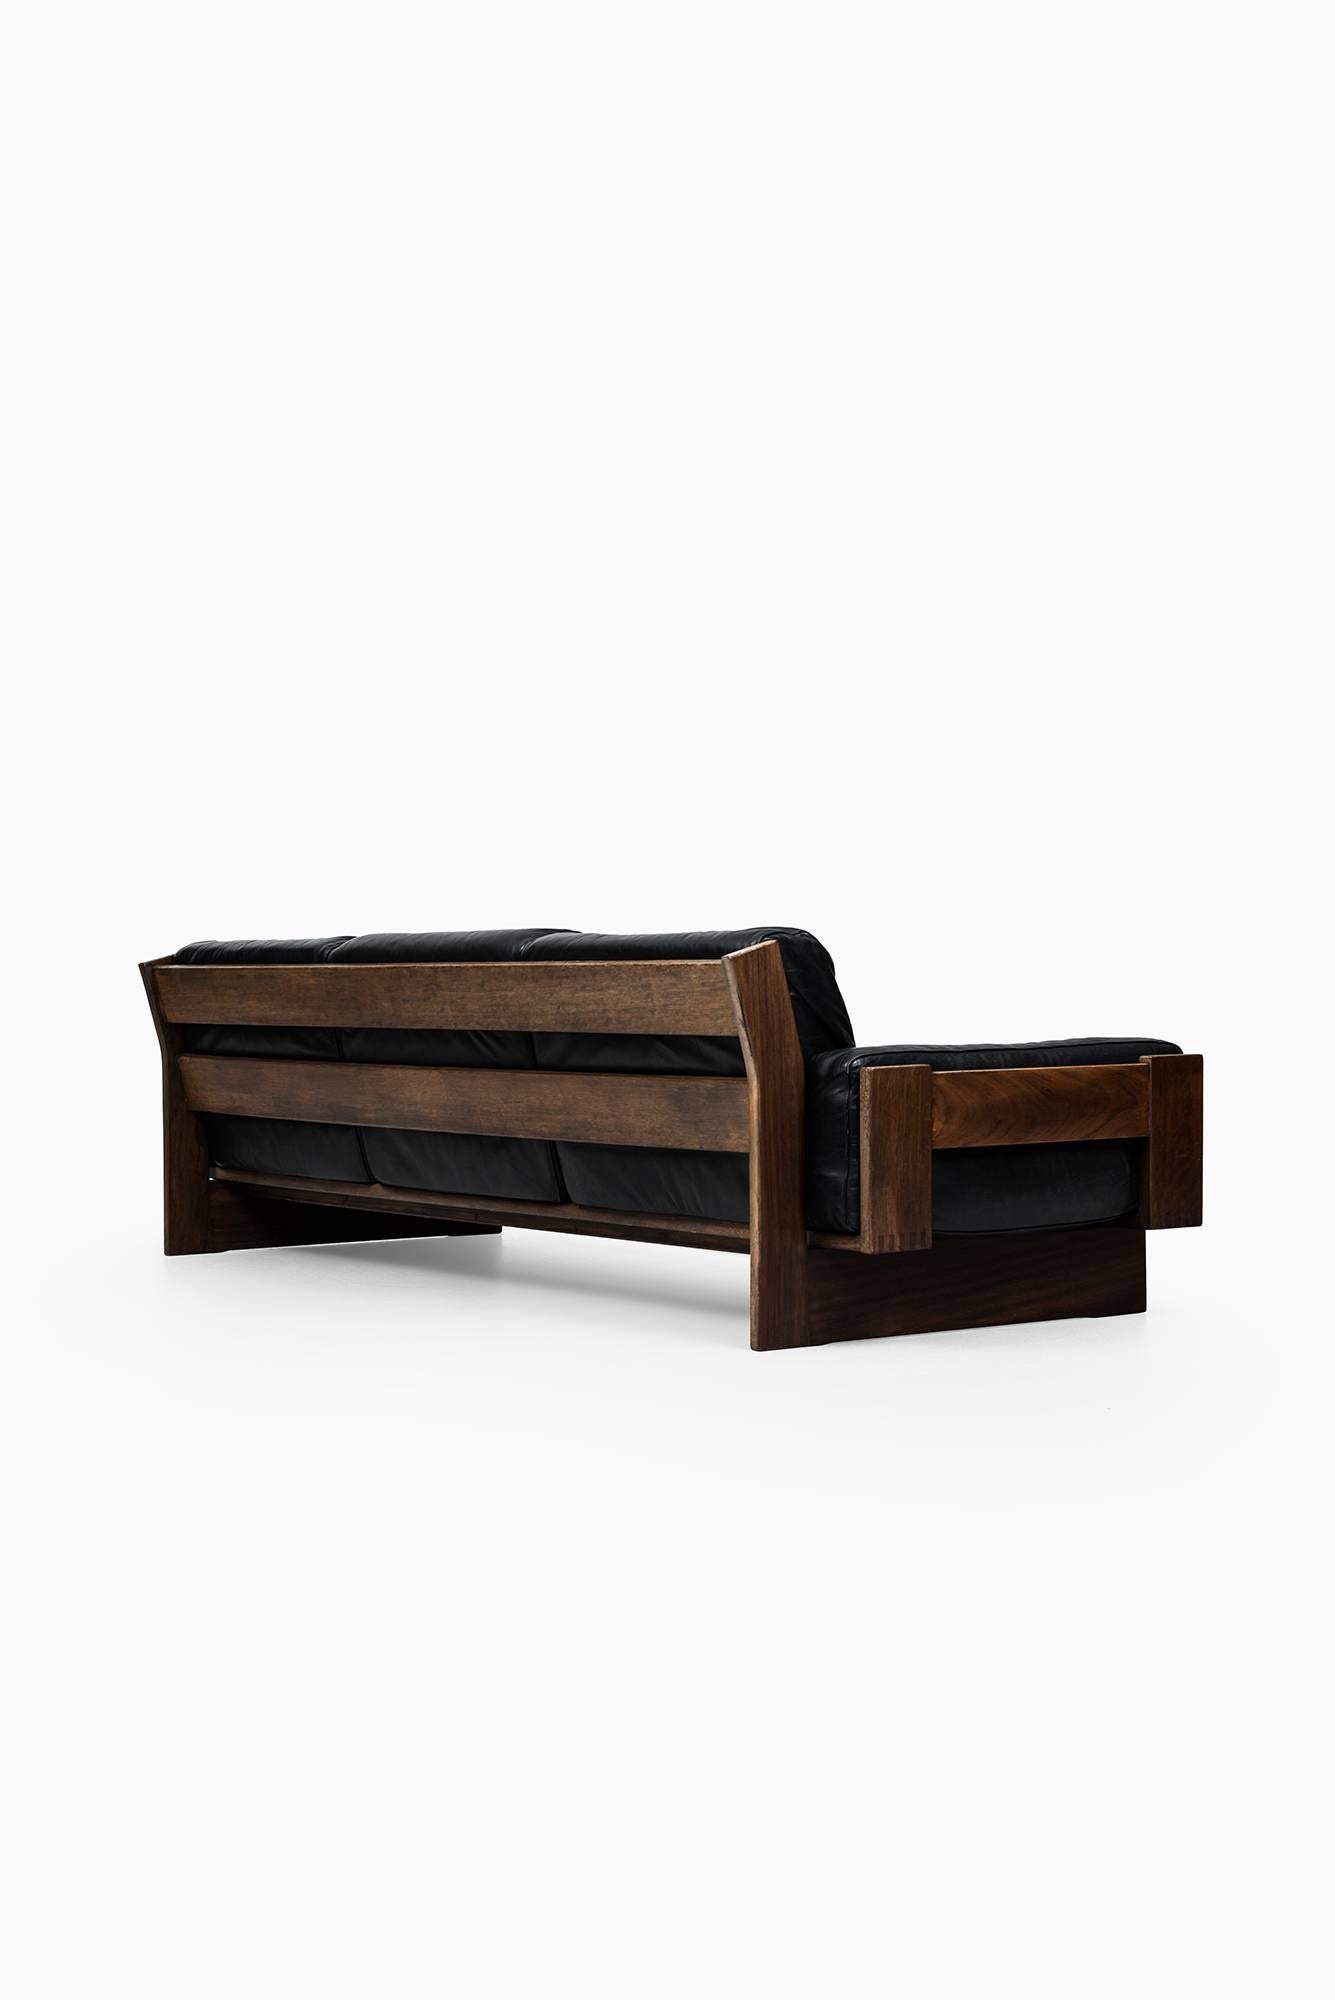 Wood Long Three-Seat Sofa designed by Peter Opsvik and produced in Norway